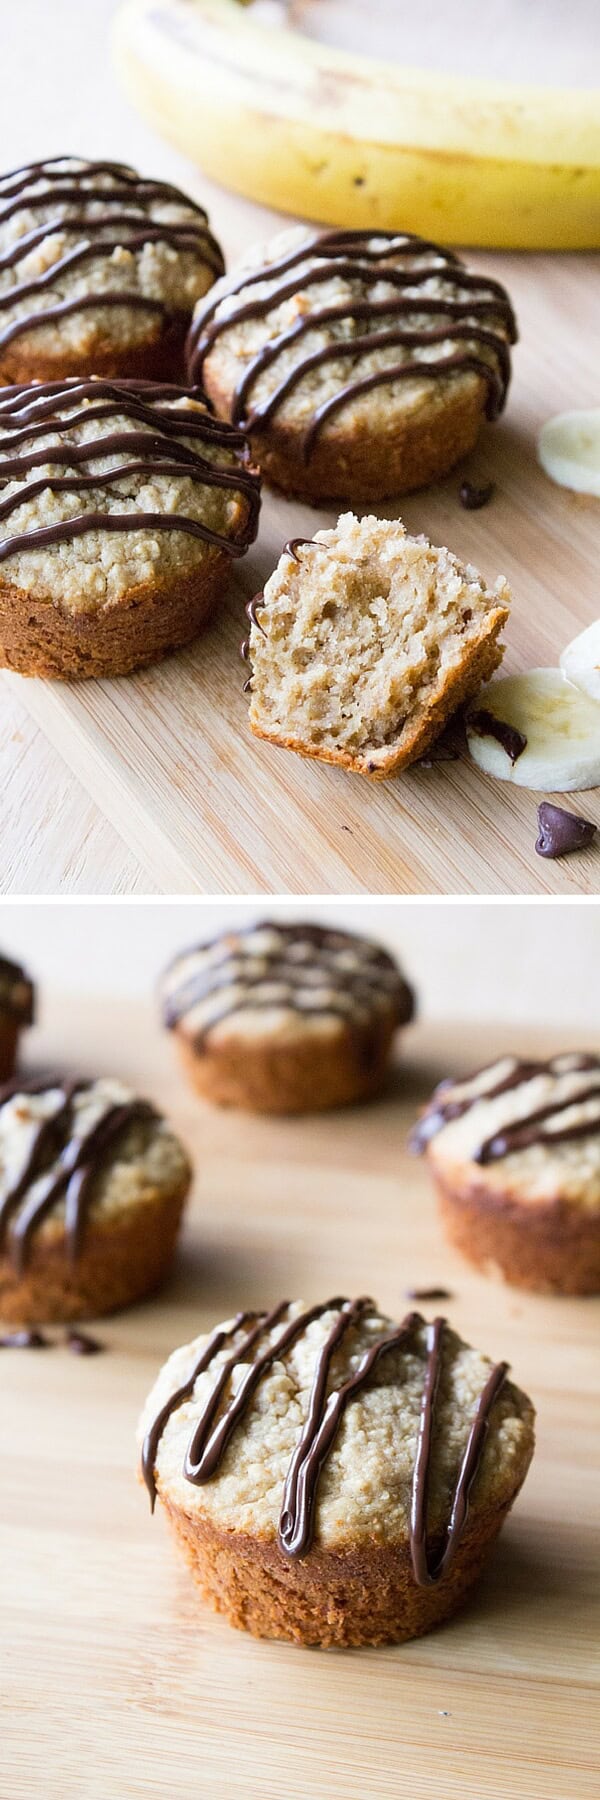 Peanut Butter Banana Muffins with Chocolate Glaze. Gluten free, sugar free & dairy free - you won't believe how easy and delicious this recipe is! www.justsotasty.com